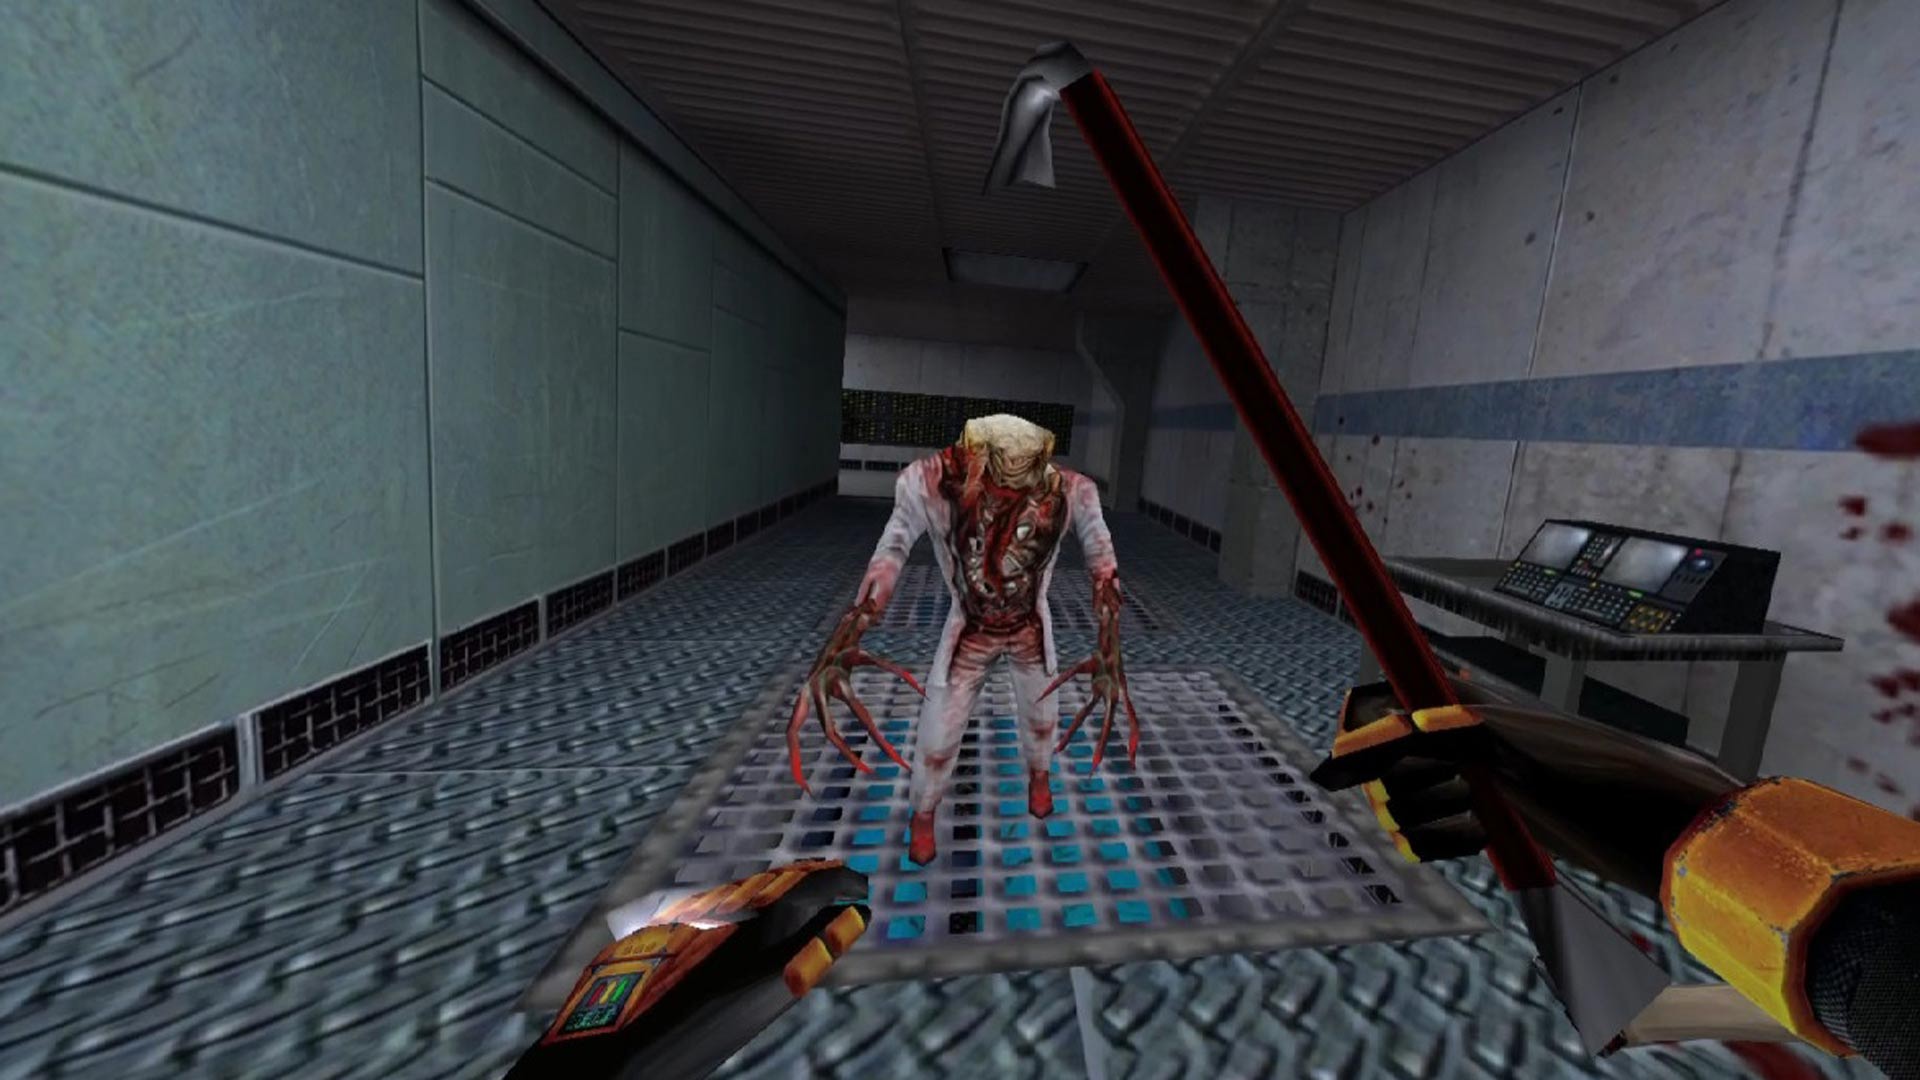 Now modders are using Half-Life: Alyx to get Half-Life 2 working in VR